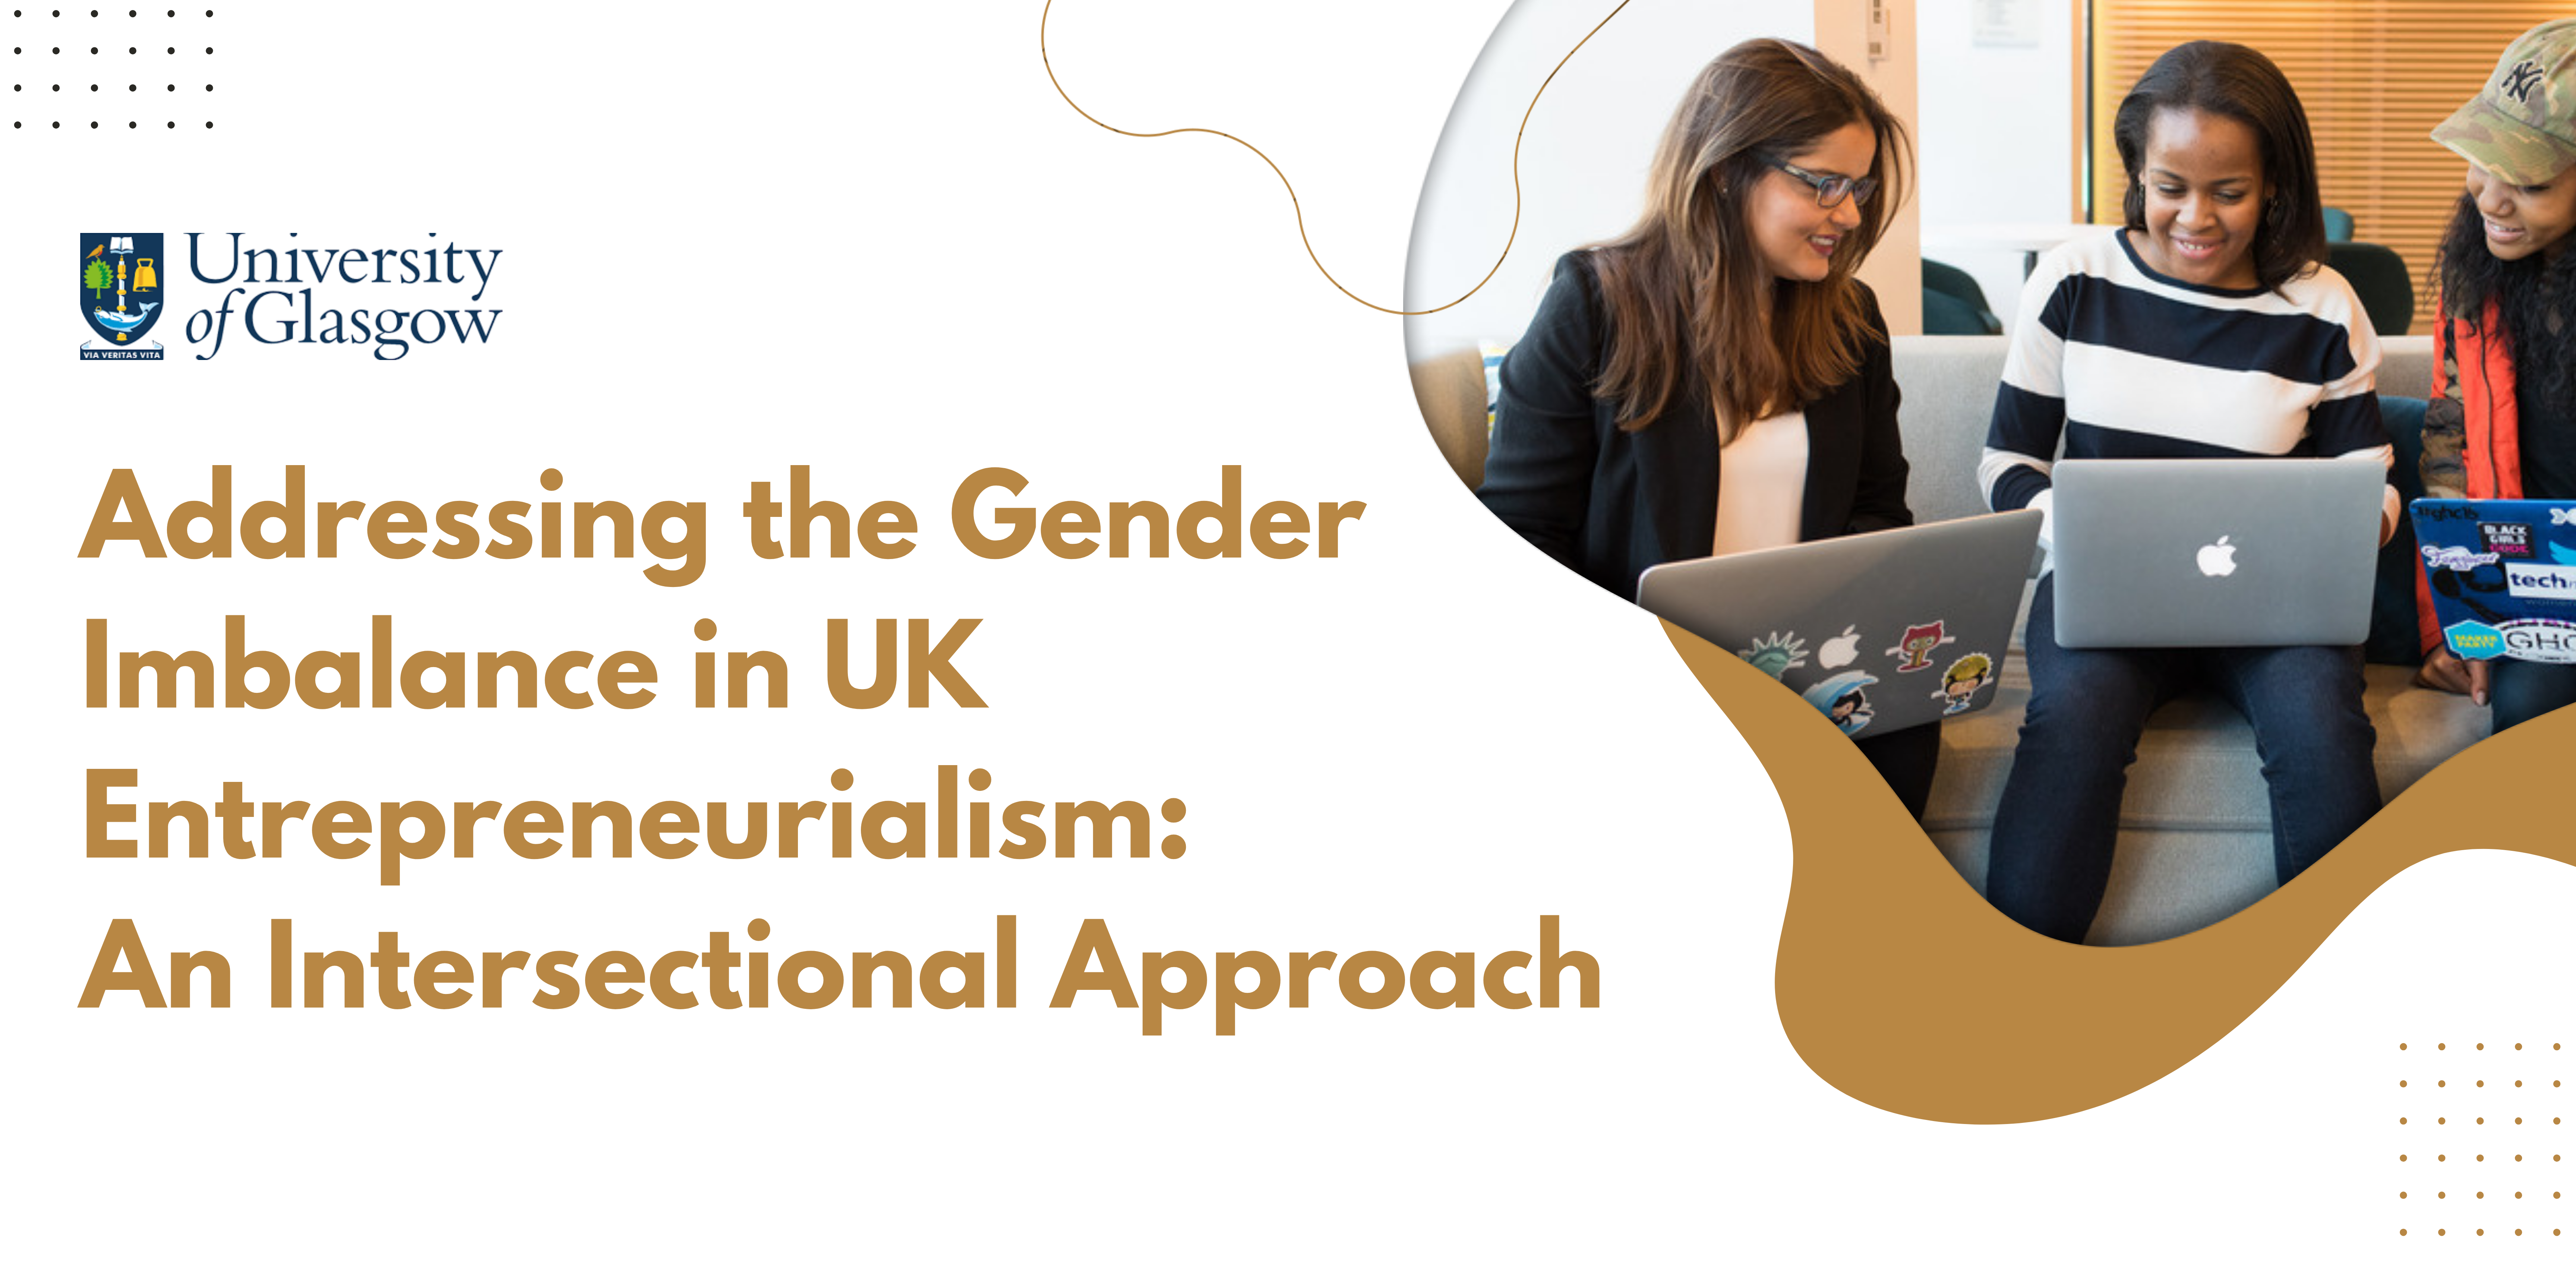 A visual which features an image of a group of women in discussion with laptops. Also features graphics and the event title: Addressing the Gender Imbalance in UK Entrepreneurialism: An Intersectional Approach.